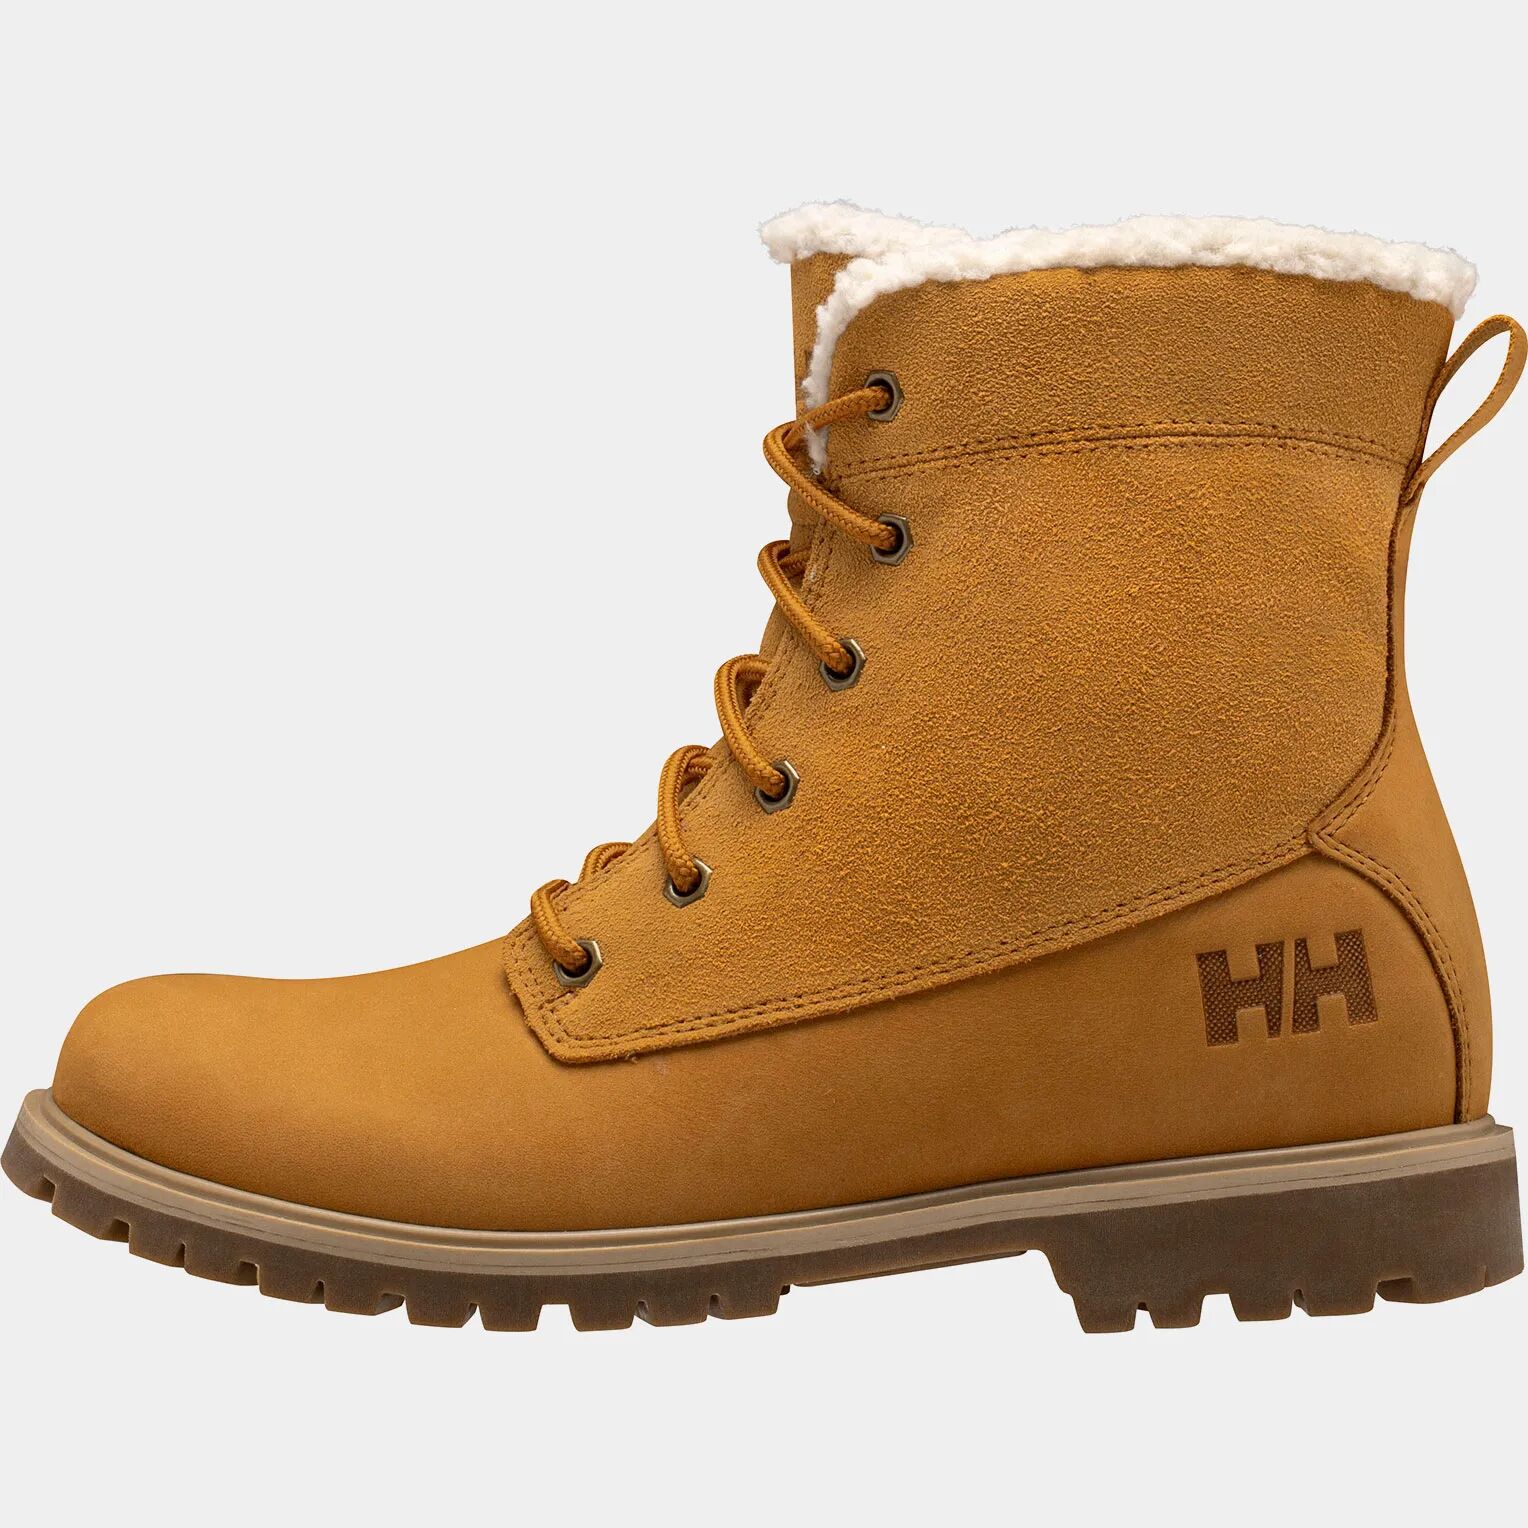 Helly Hansen Women's Marion 3 Winter Boots Brown 7 - New Wheat Brown - Female